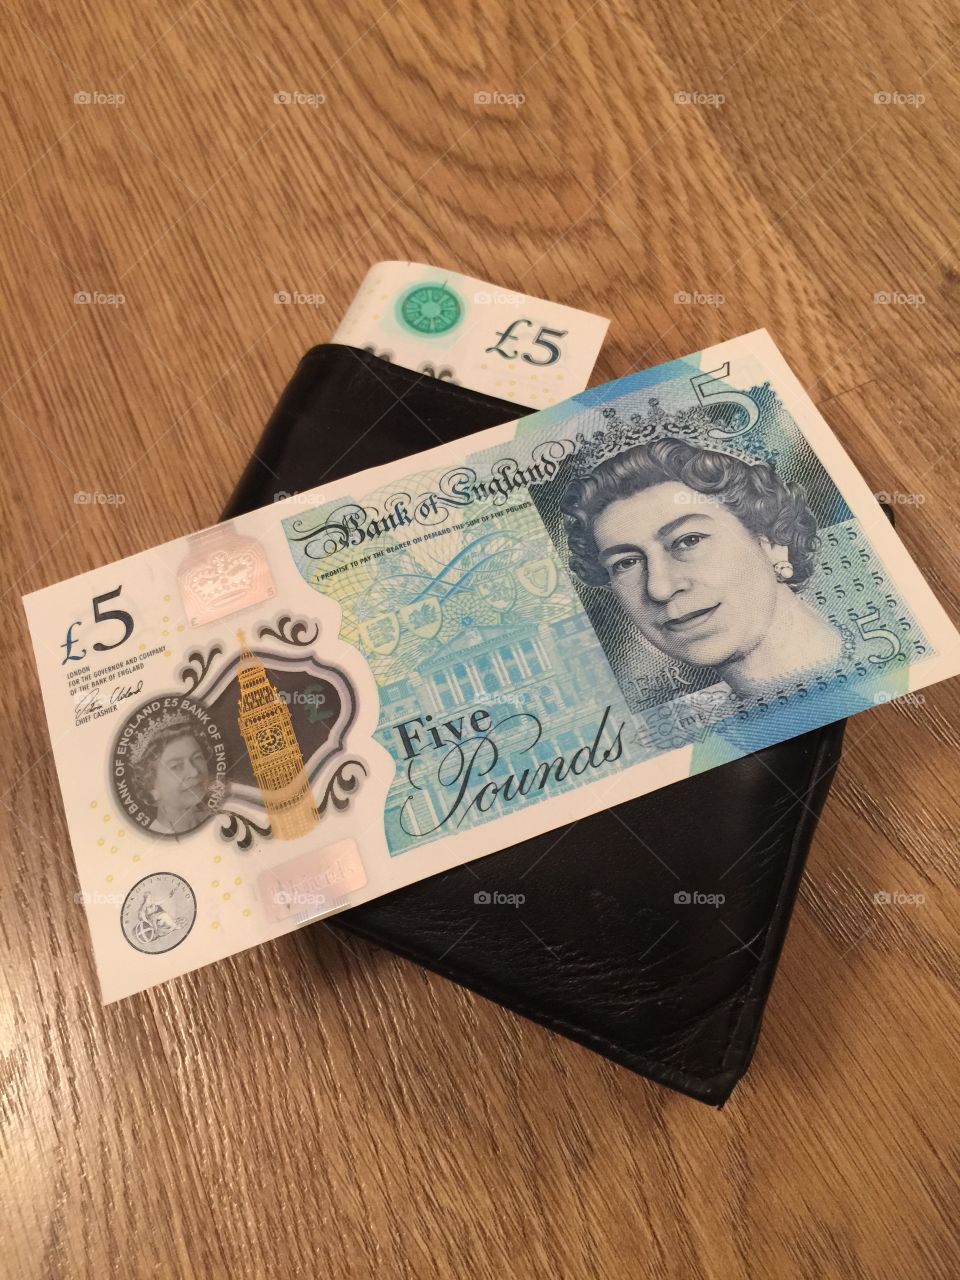 The new English 2016 polymer plastic £5.00 note